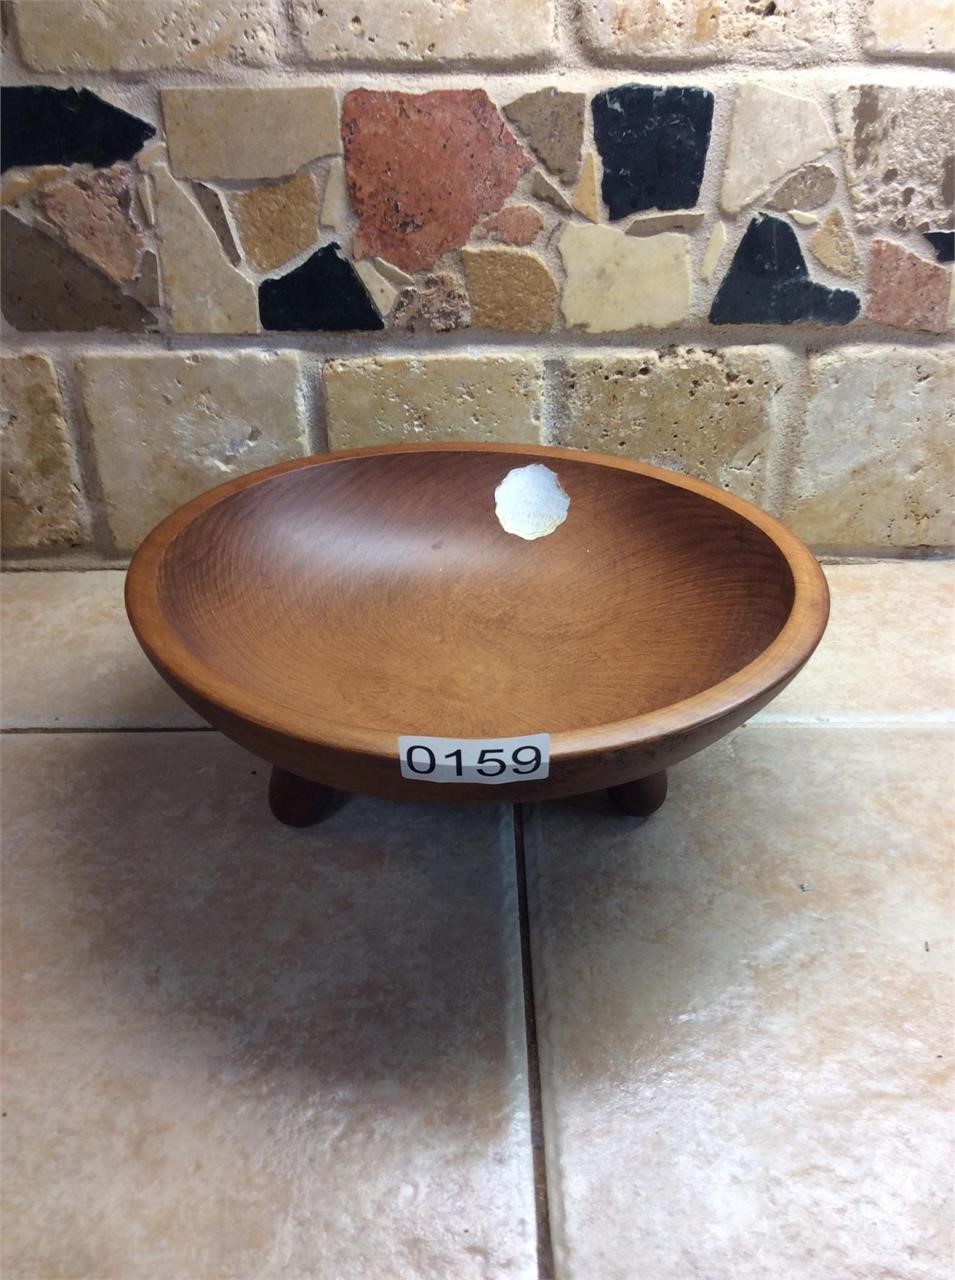 Wooden Footed Bowl